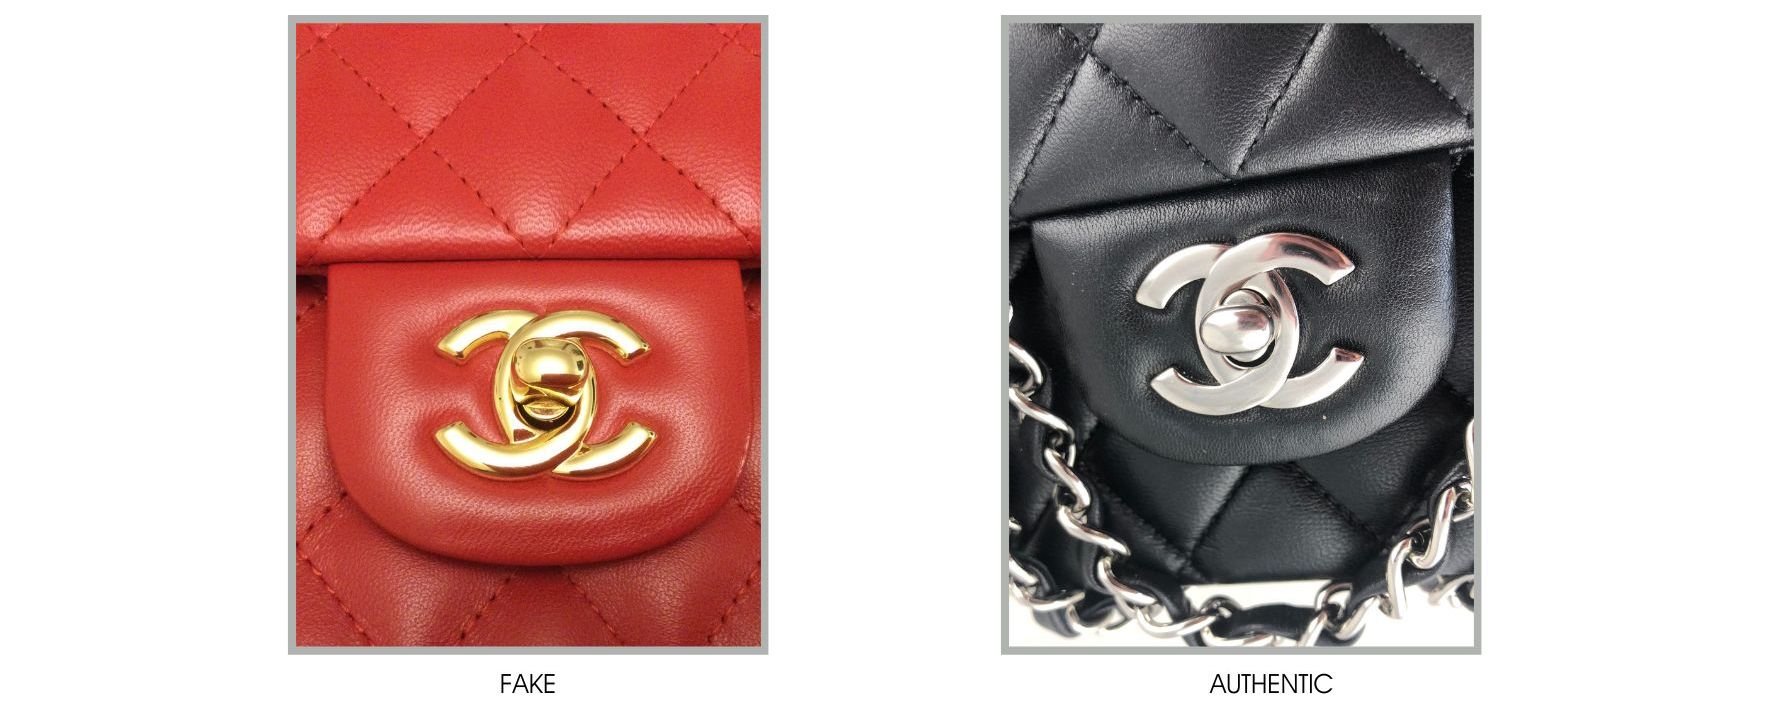 How To Spot a Fake Chanel Bag